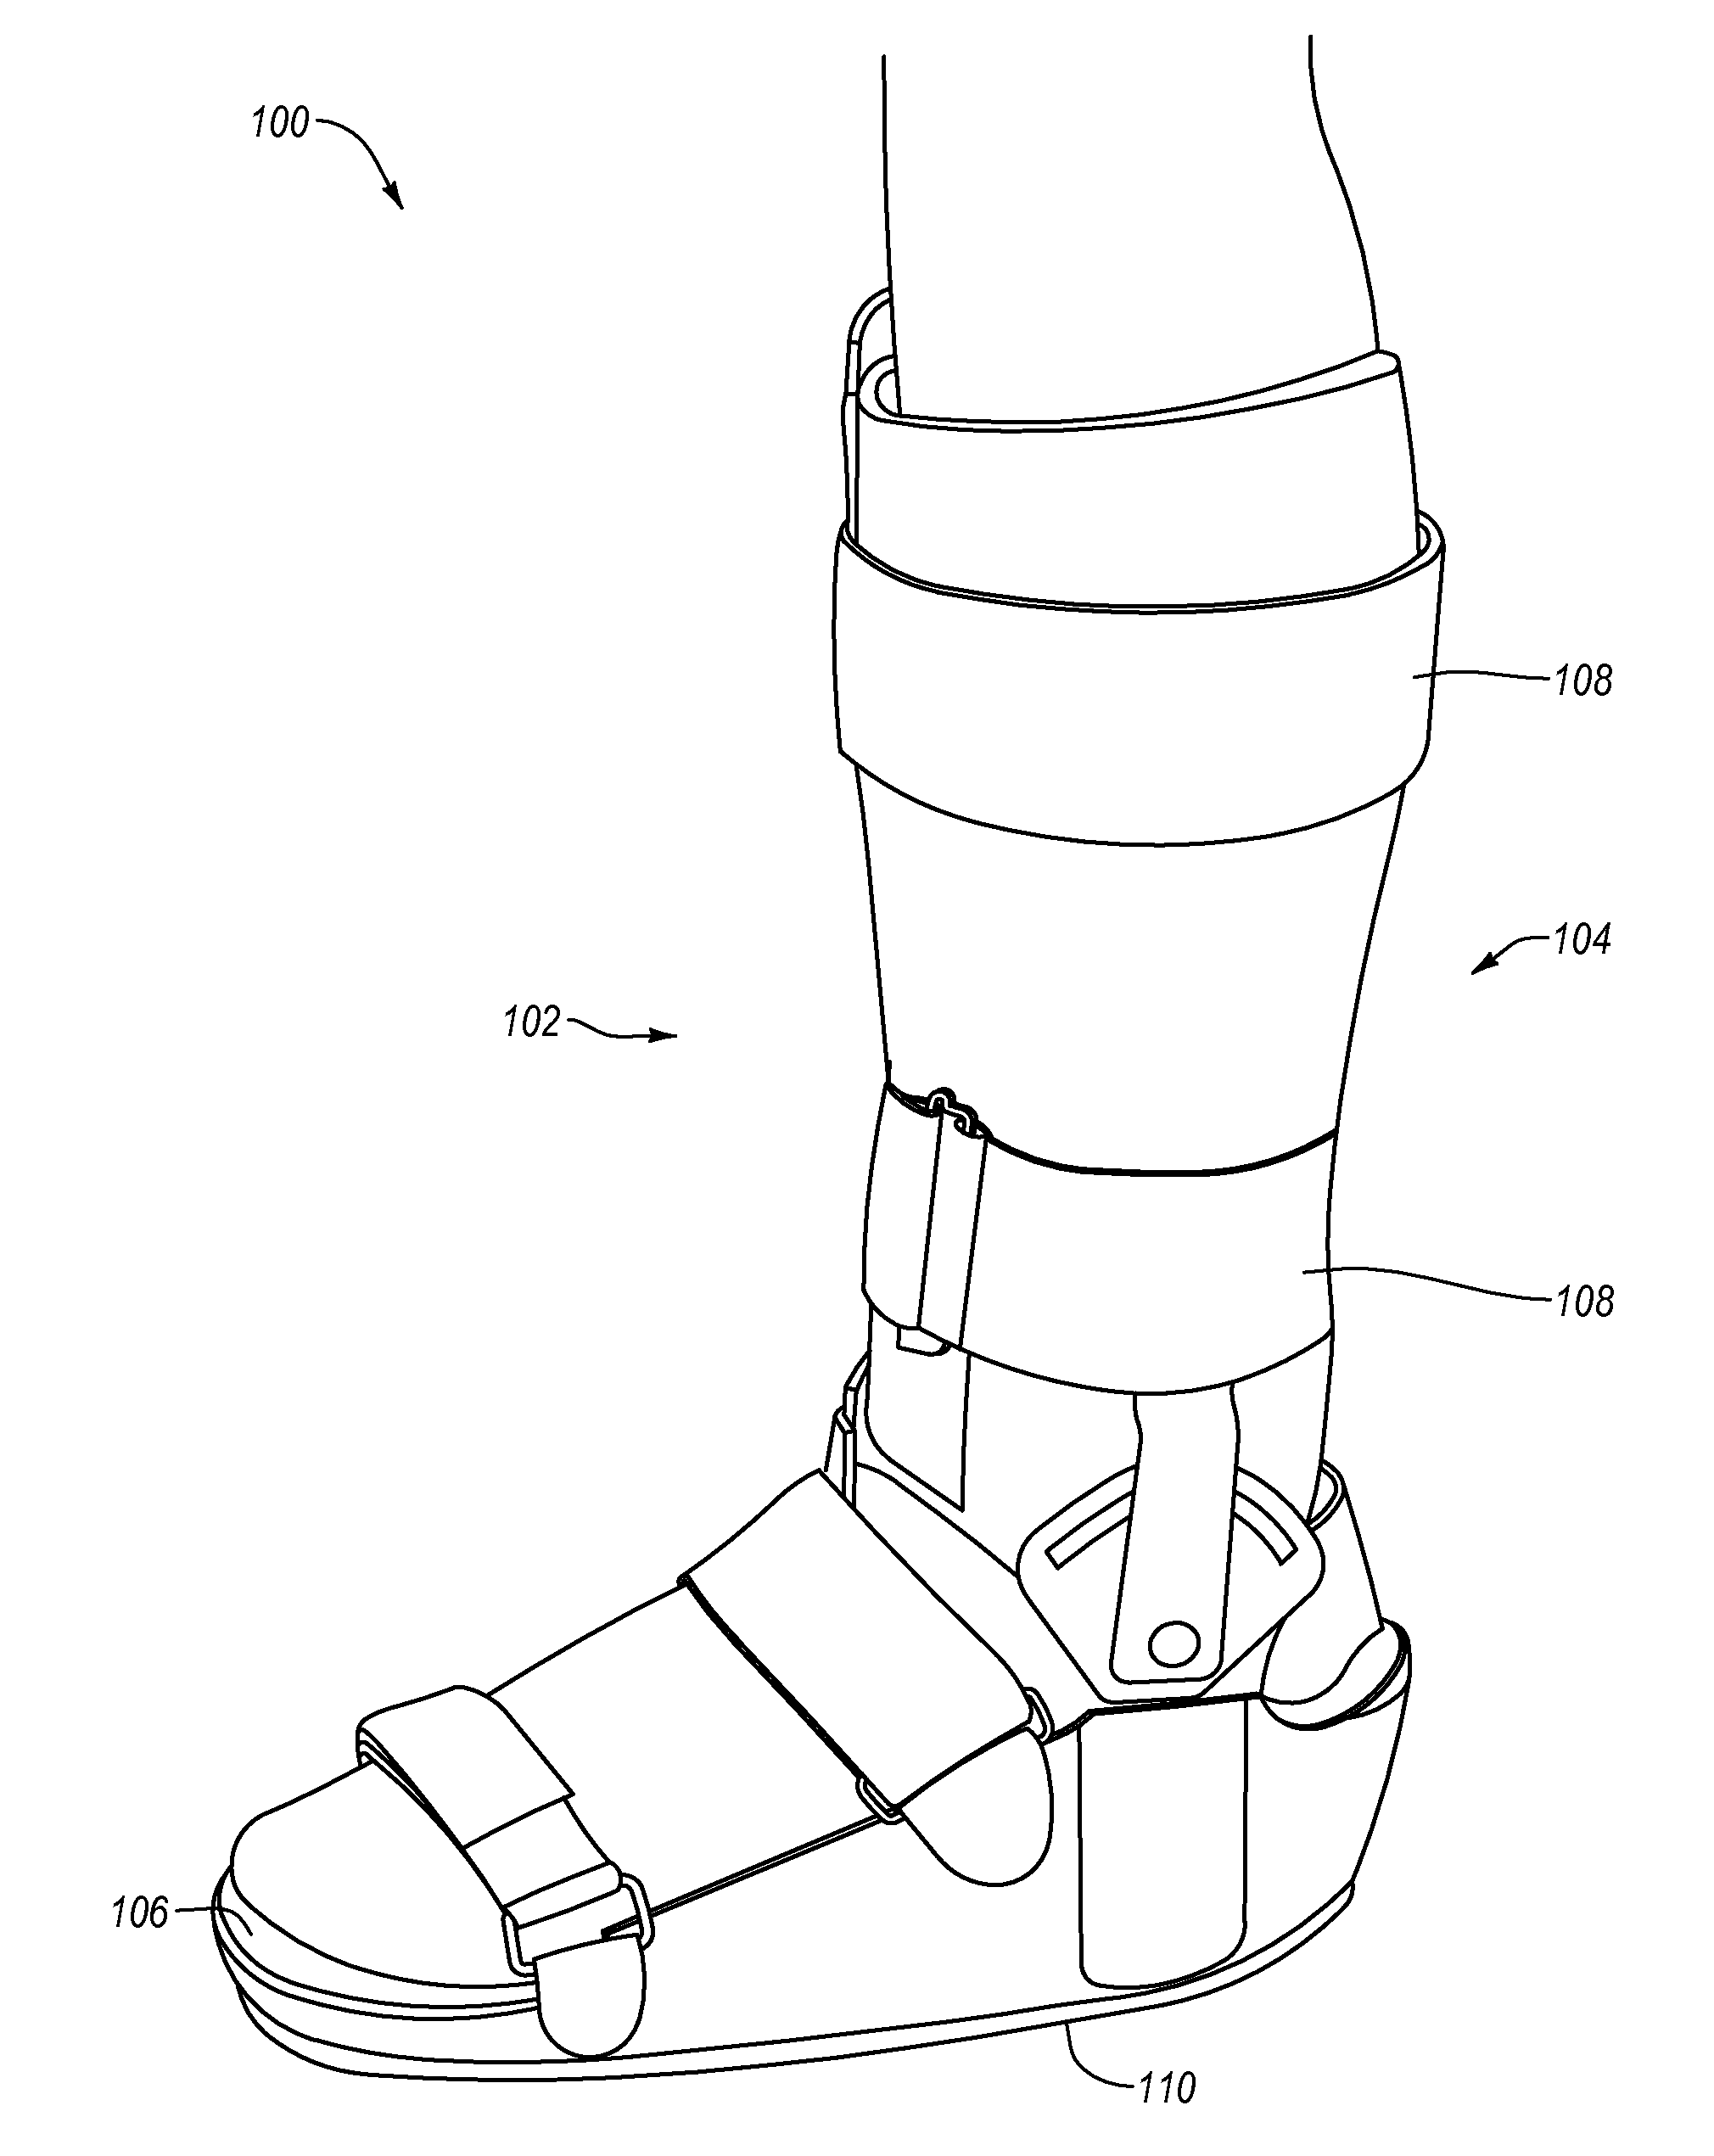 Systems, devices, and methods for monitoring an under foot load profile of a patient during a period of partial weight bearing